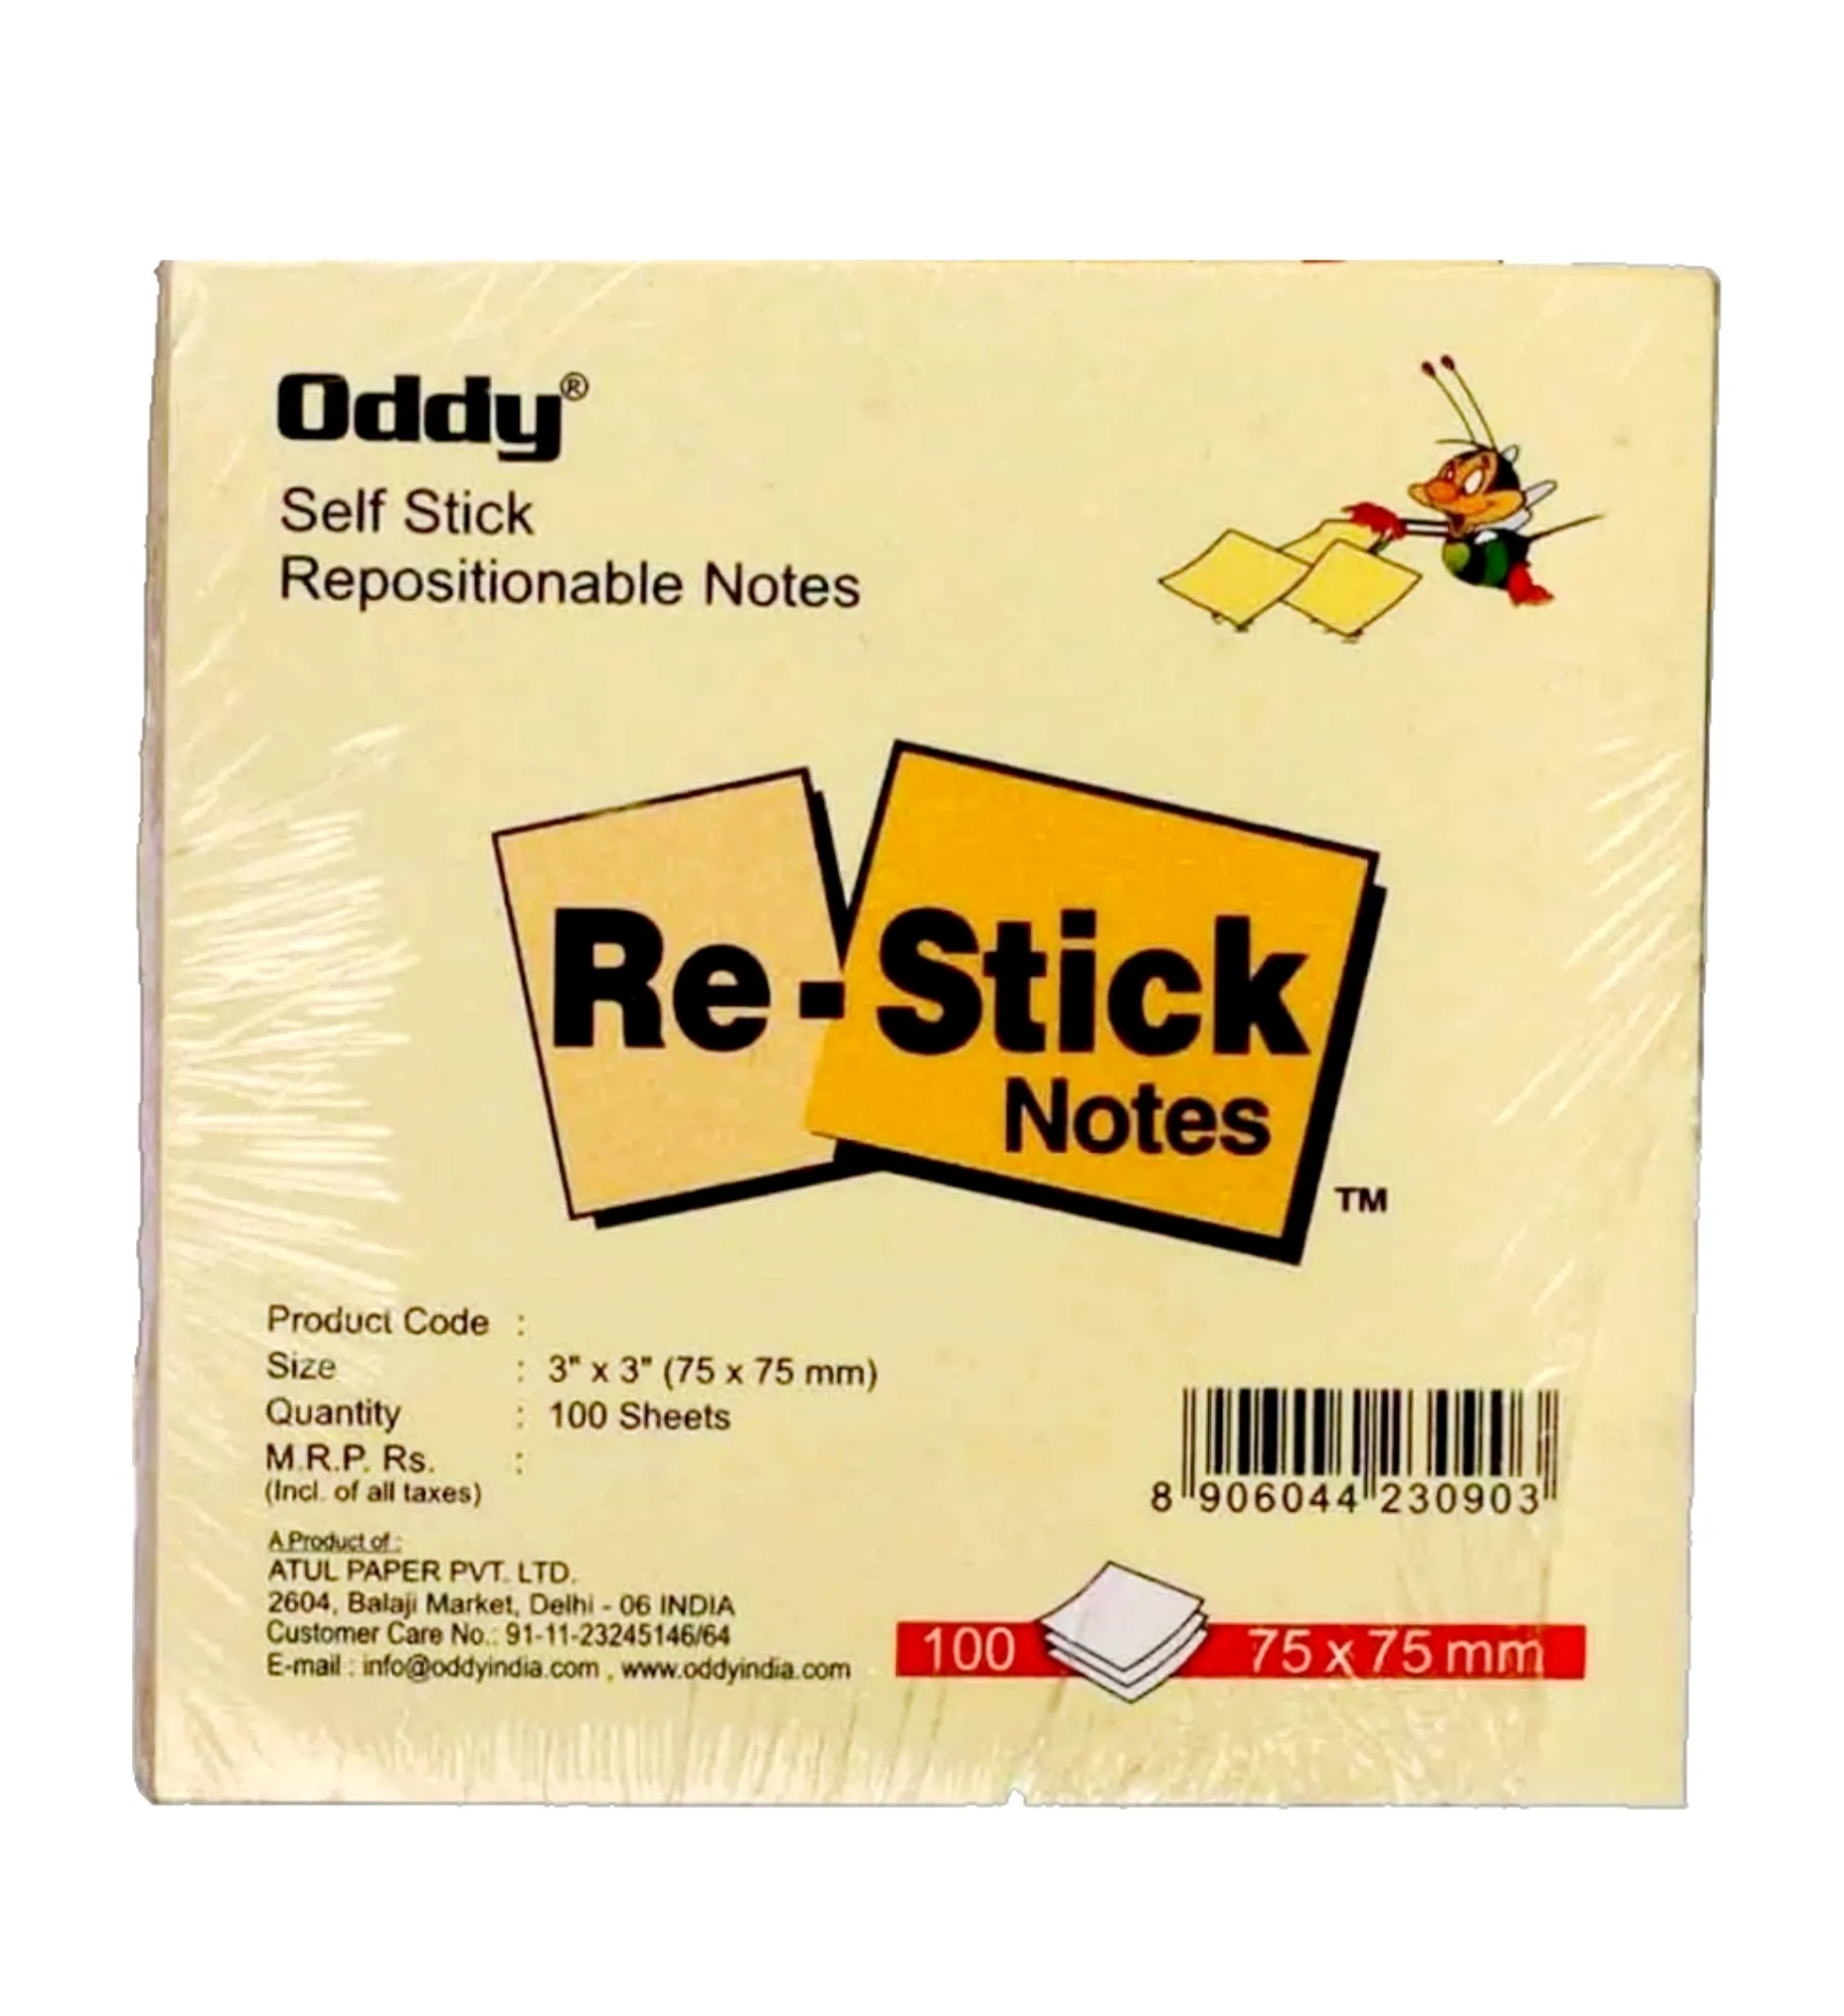 Oddy Self Stick Repositionable Notes 3"X3" (75X75 mm) 1 Pack of 100 Sheets